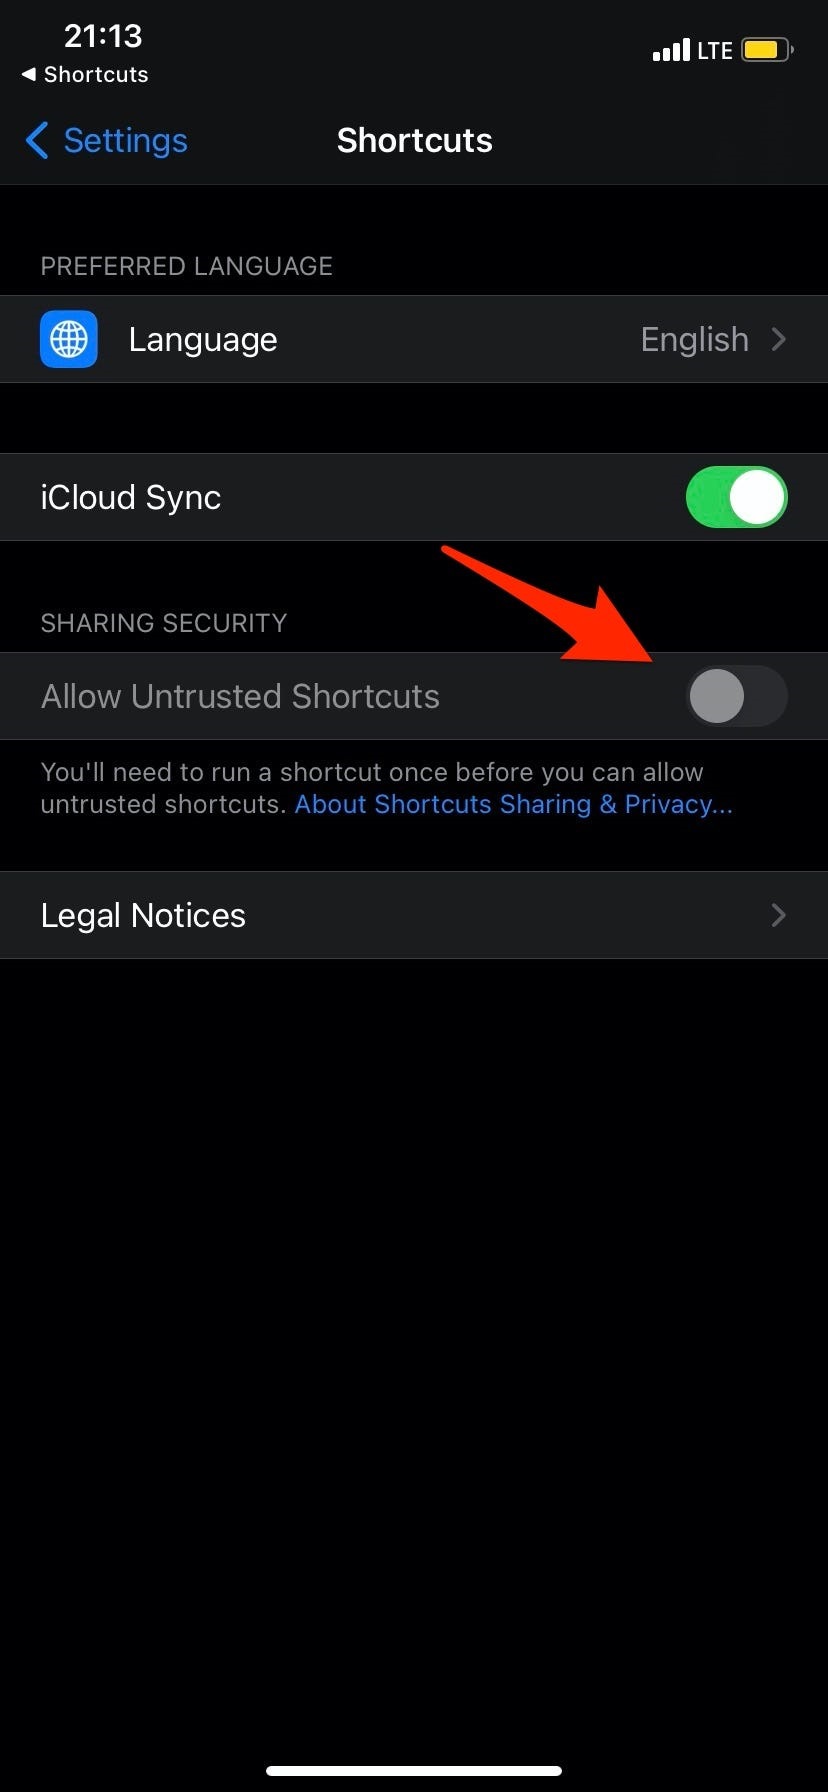 How To Use The SIRI 'I'm Getting Pulled Over' Shortcut To Record Police Encounters During Traffic Stops With Your iPhone